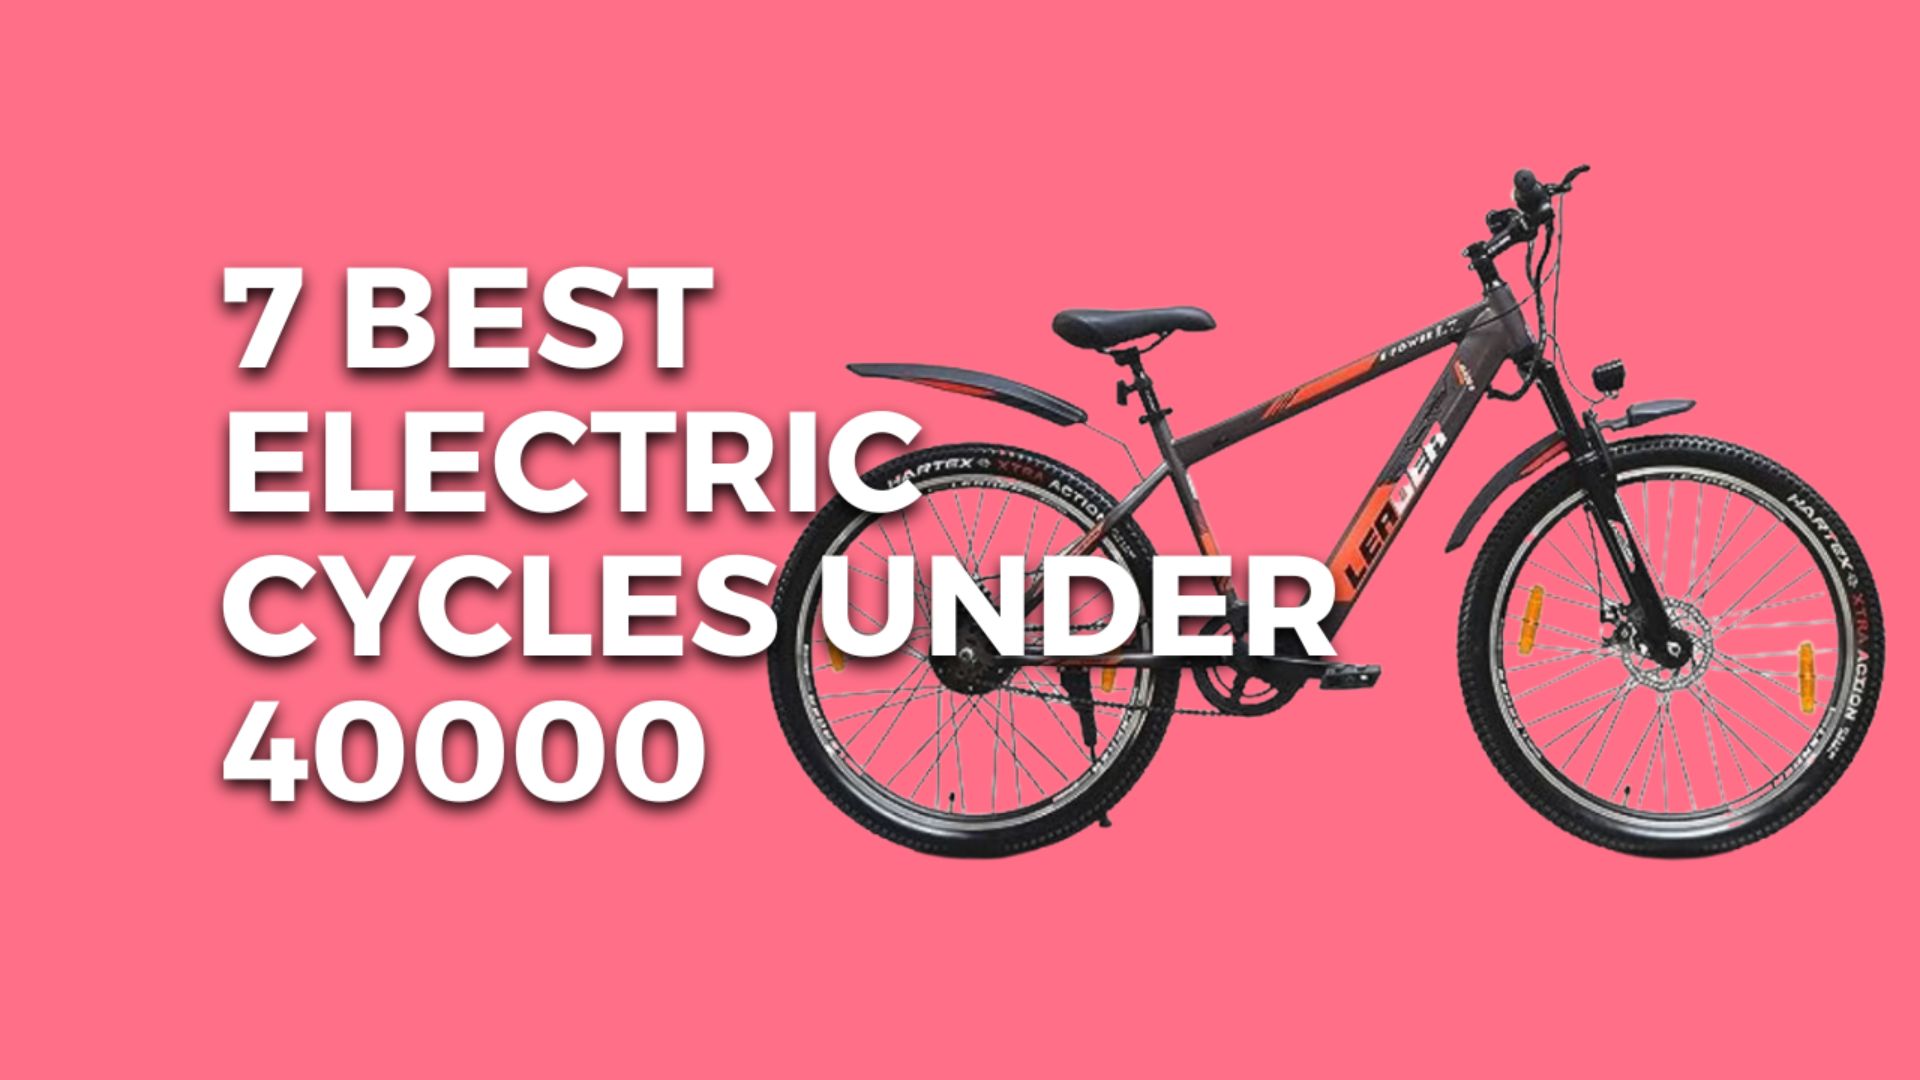 7 Best Electric Cycles Under 40000